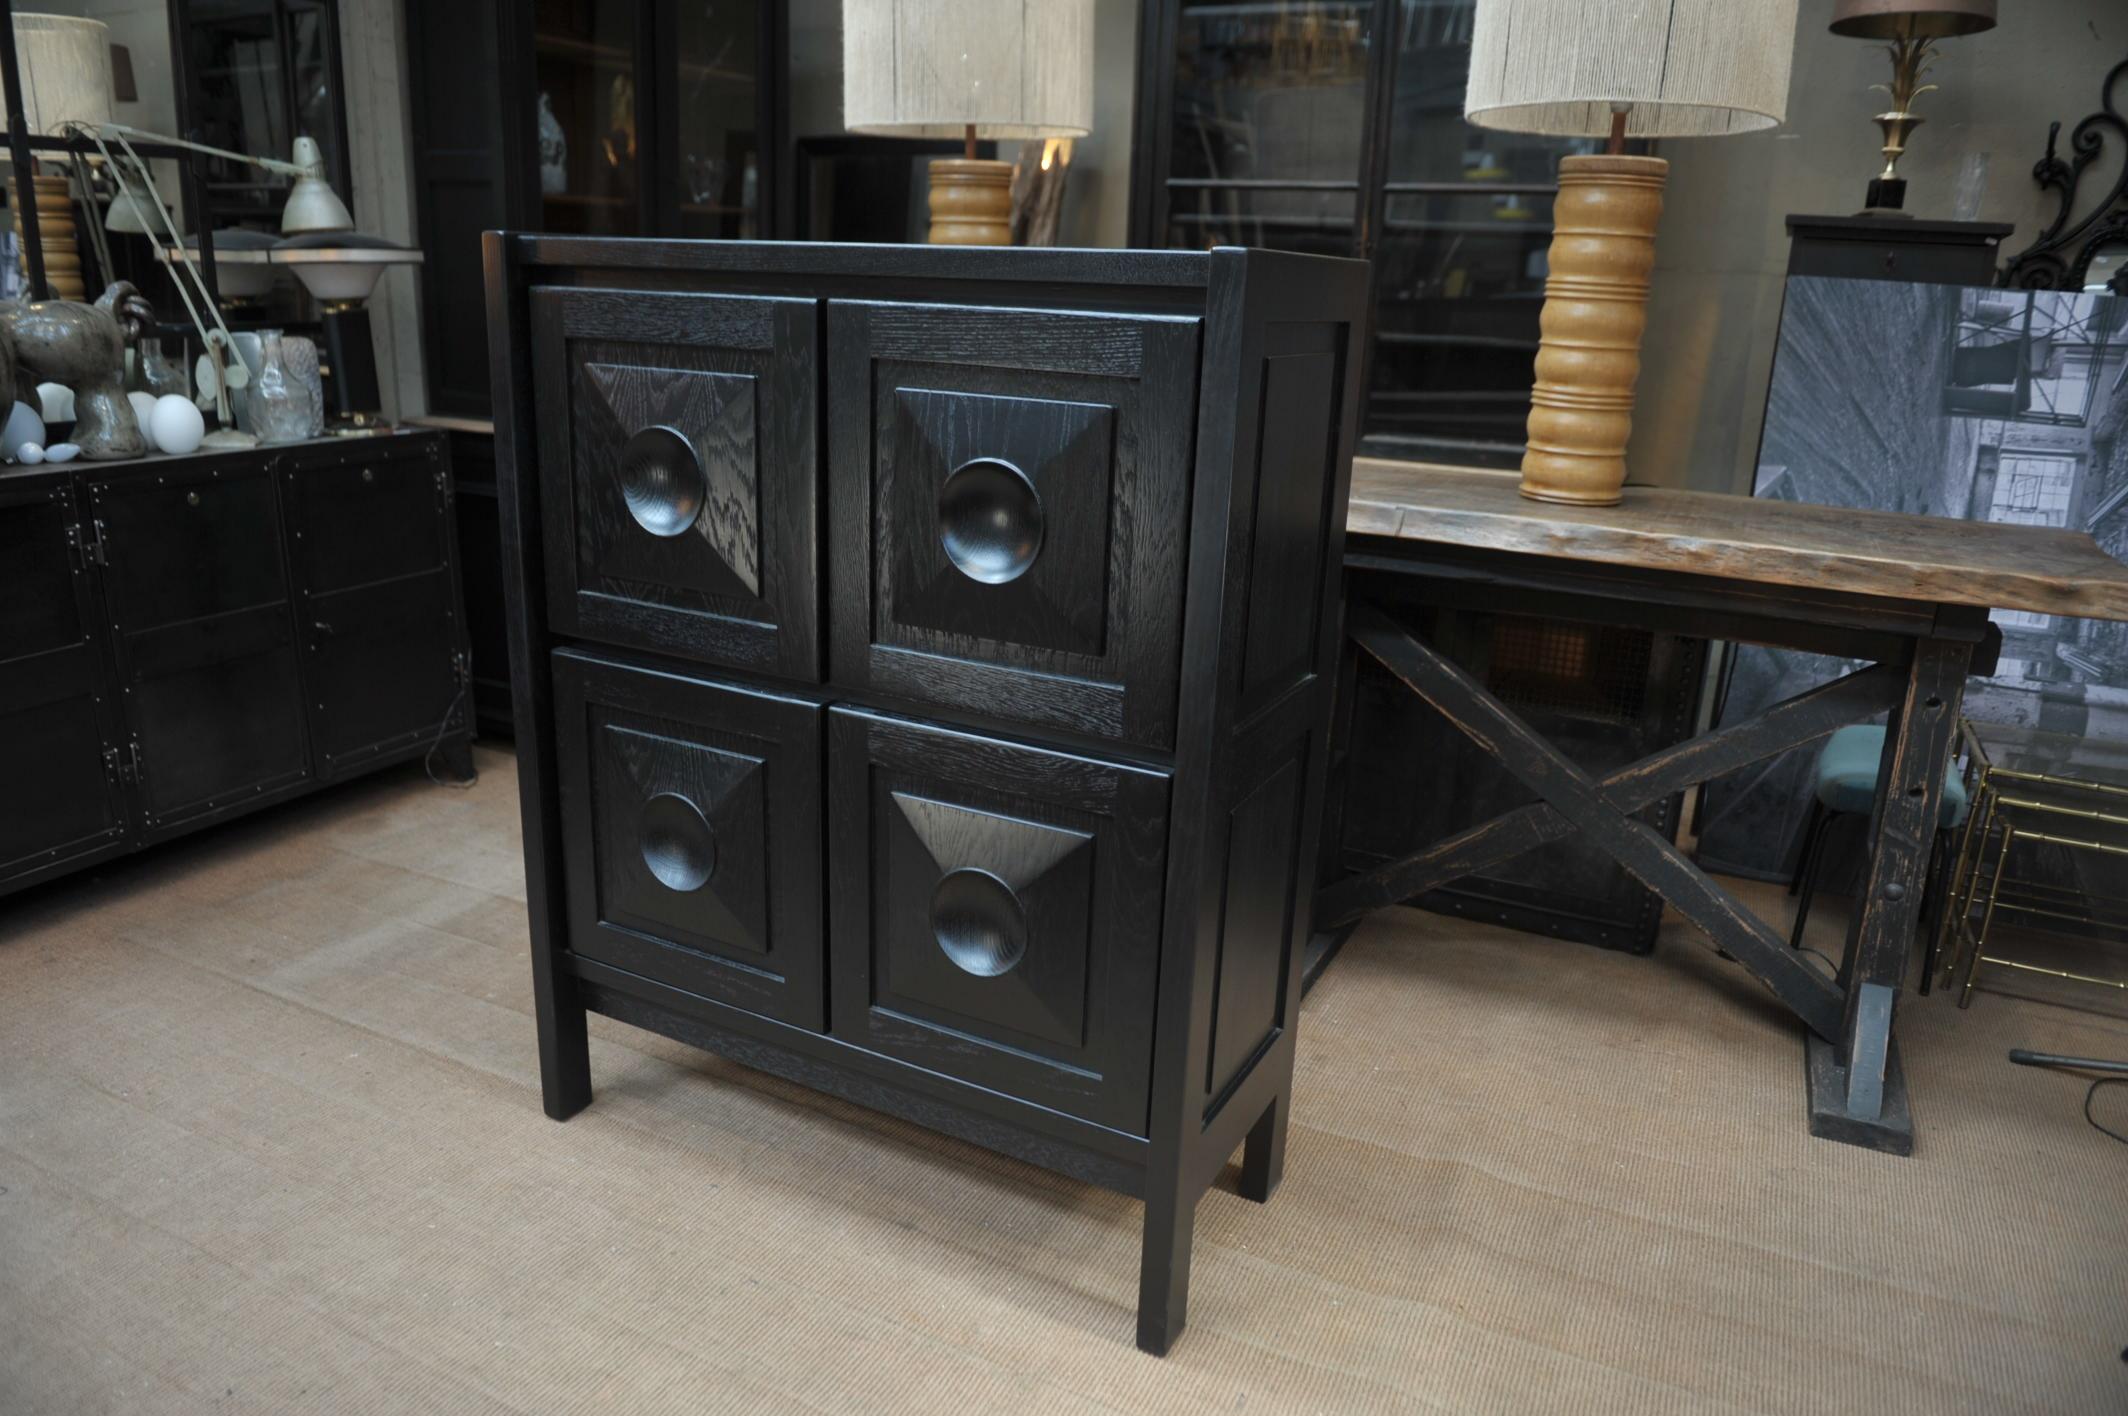 4 doors black lacquered brutalist cabinet with 4 inside removable shelves all in excellent condition, Circa 1970, weight 58 kg.